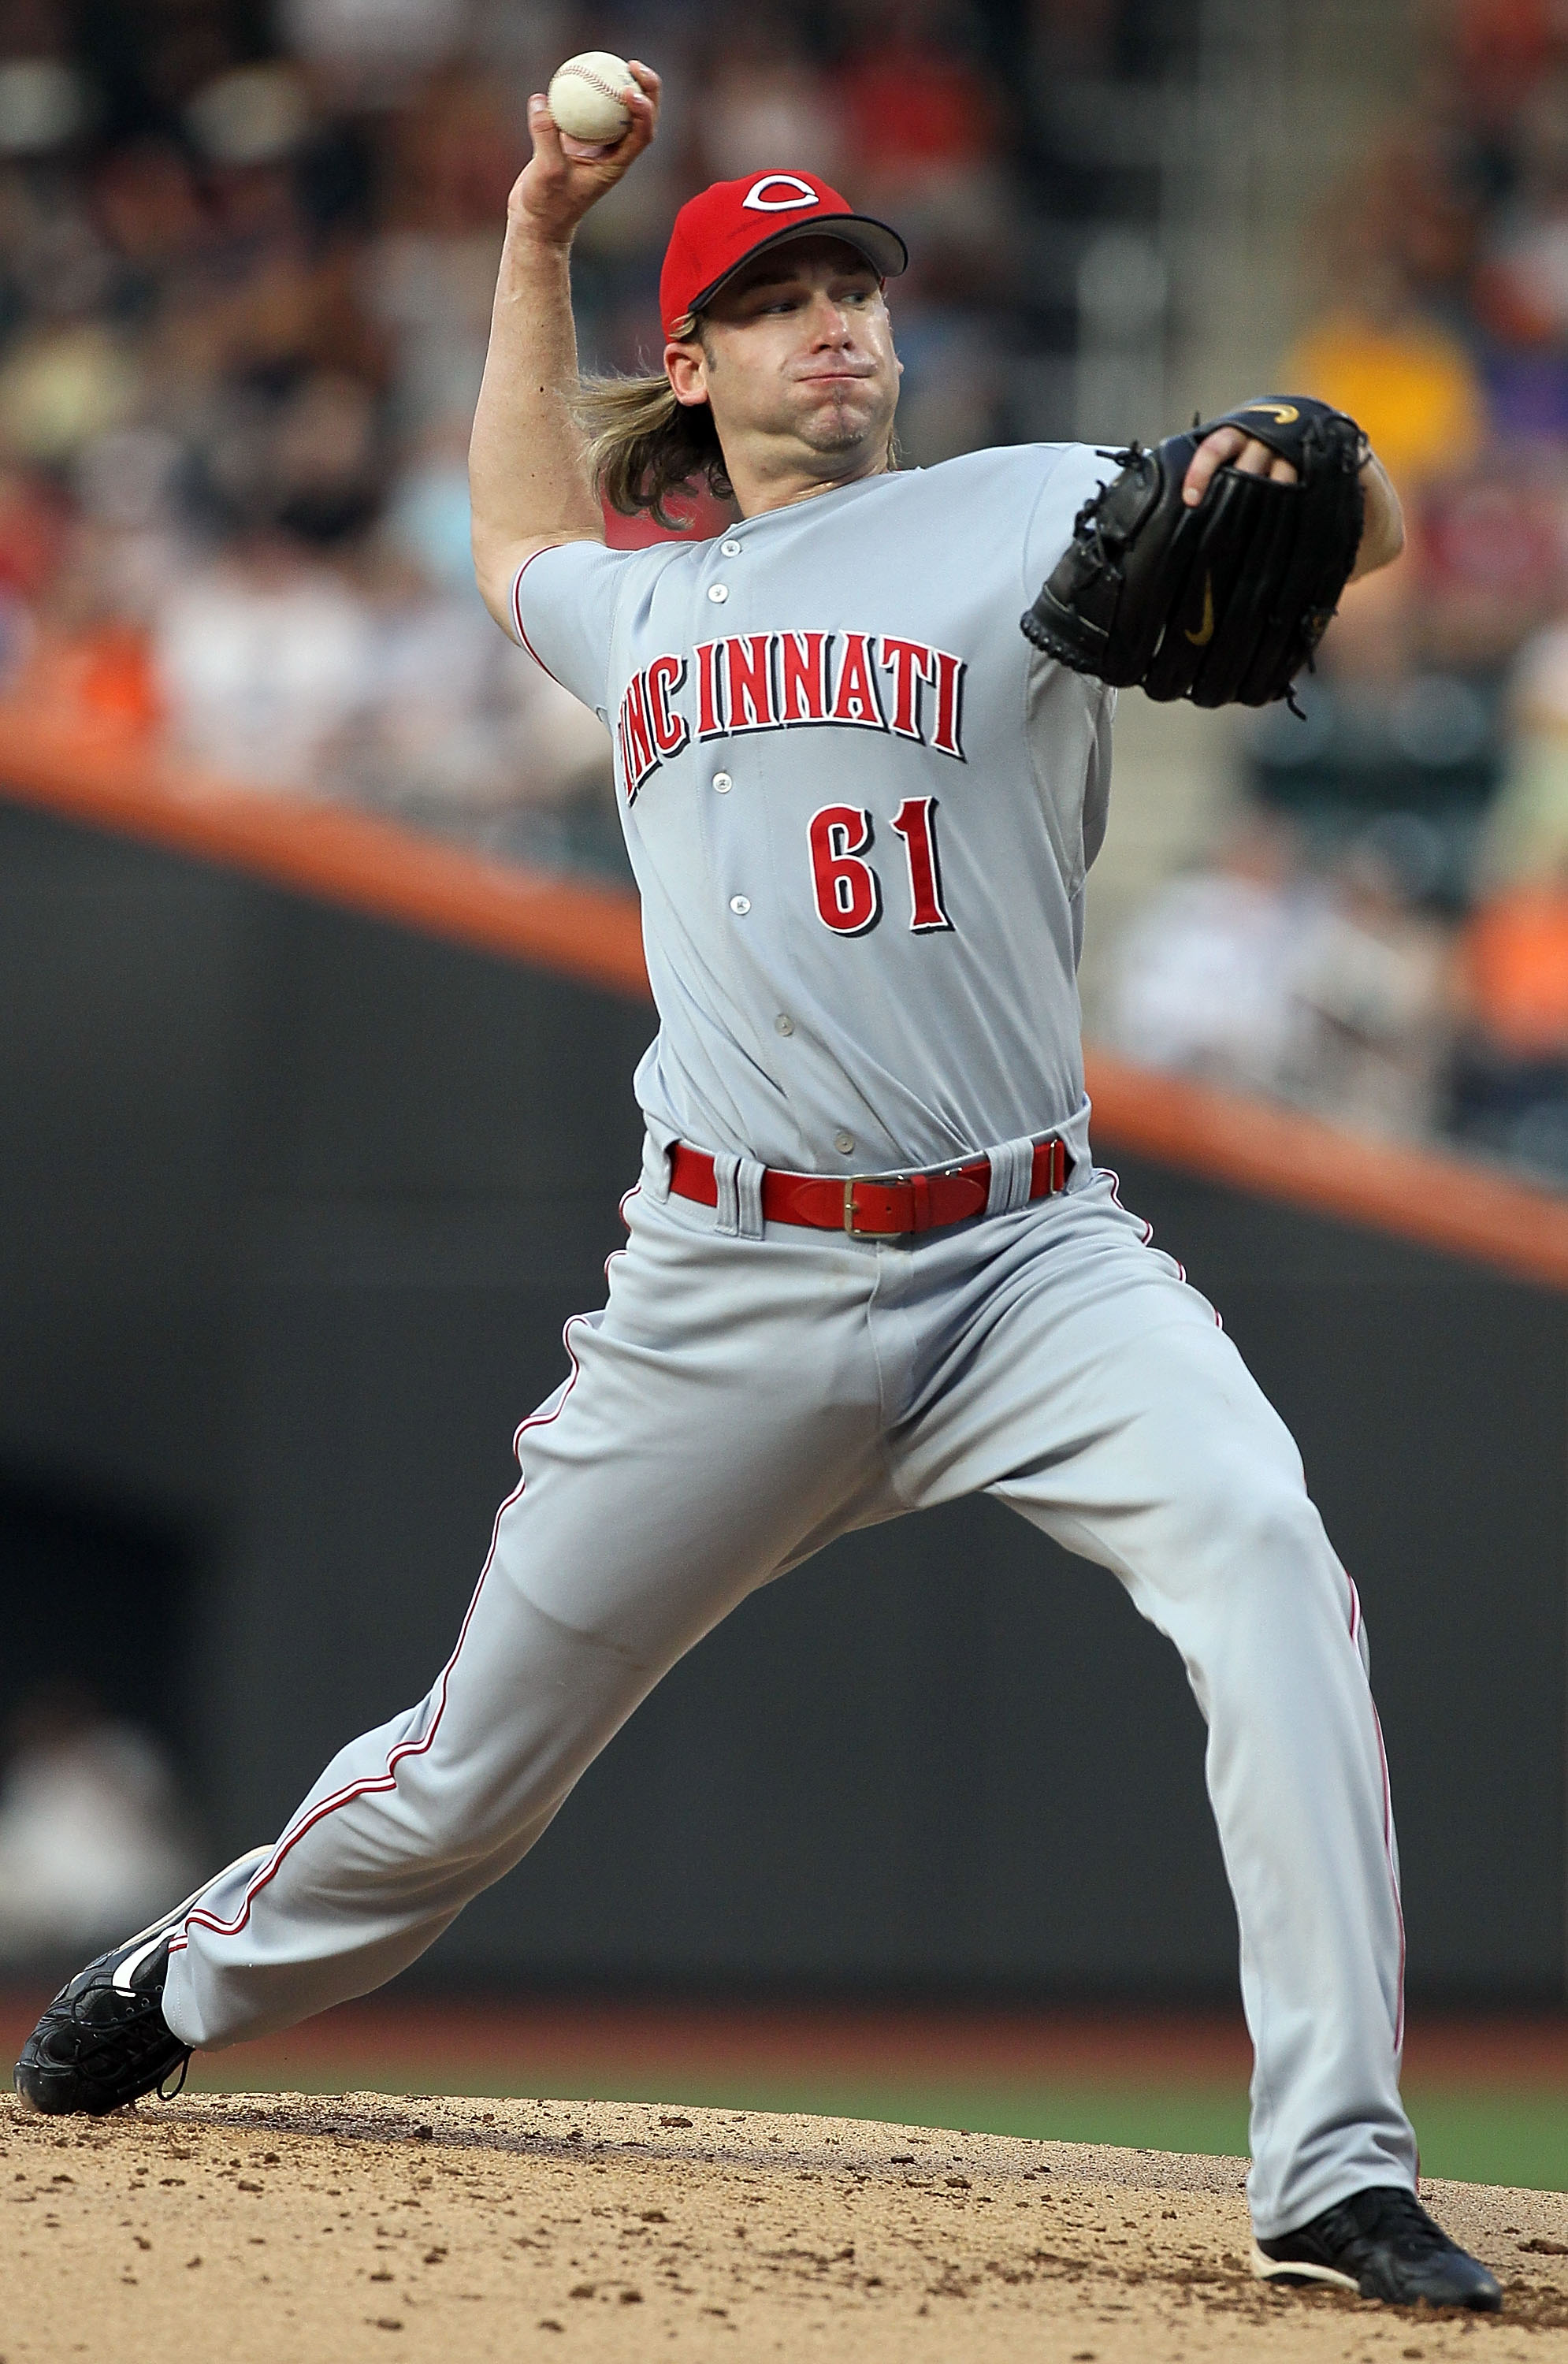 NEW YORK - JULY 07:  Bronson Arroyo #61 of the Cincinnati Reds delivers a pitch against the New York Mets on July 7, 2010 at Citi Field in the Flushing neighborhood of the Queens borough of New York City.  (Photo by Jim McIsaac/Getty Images)